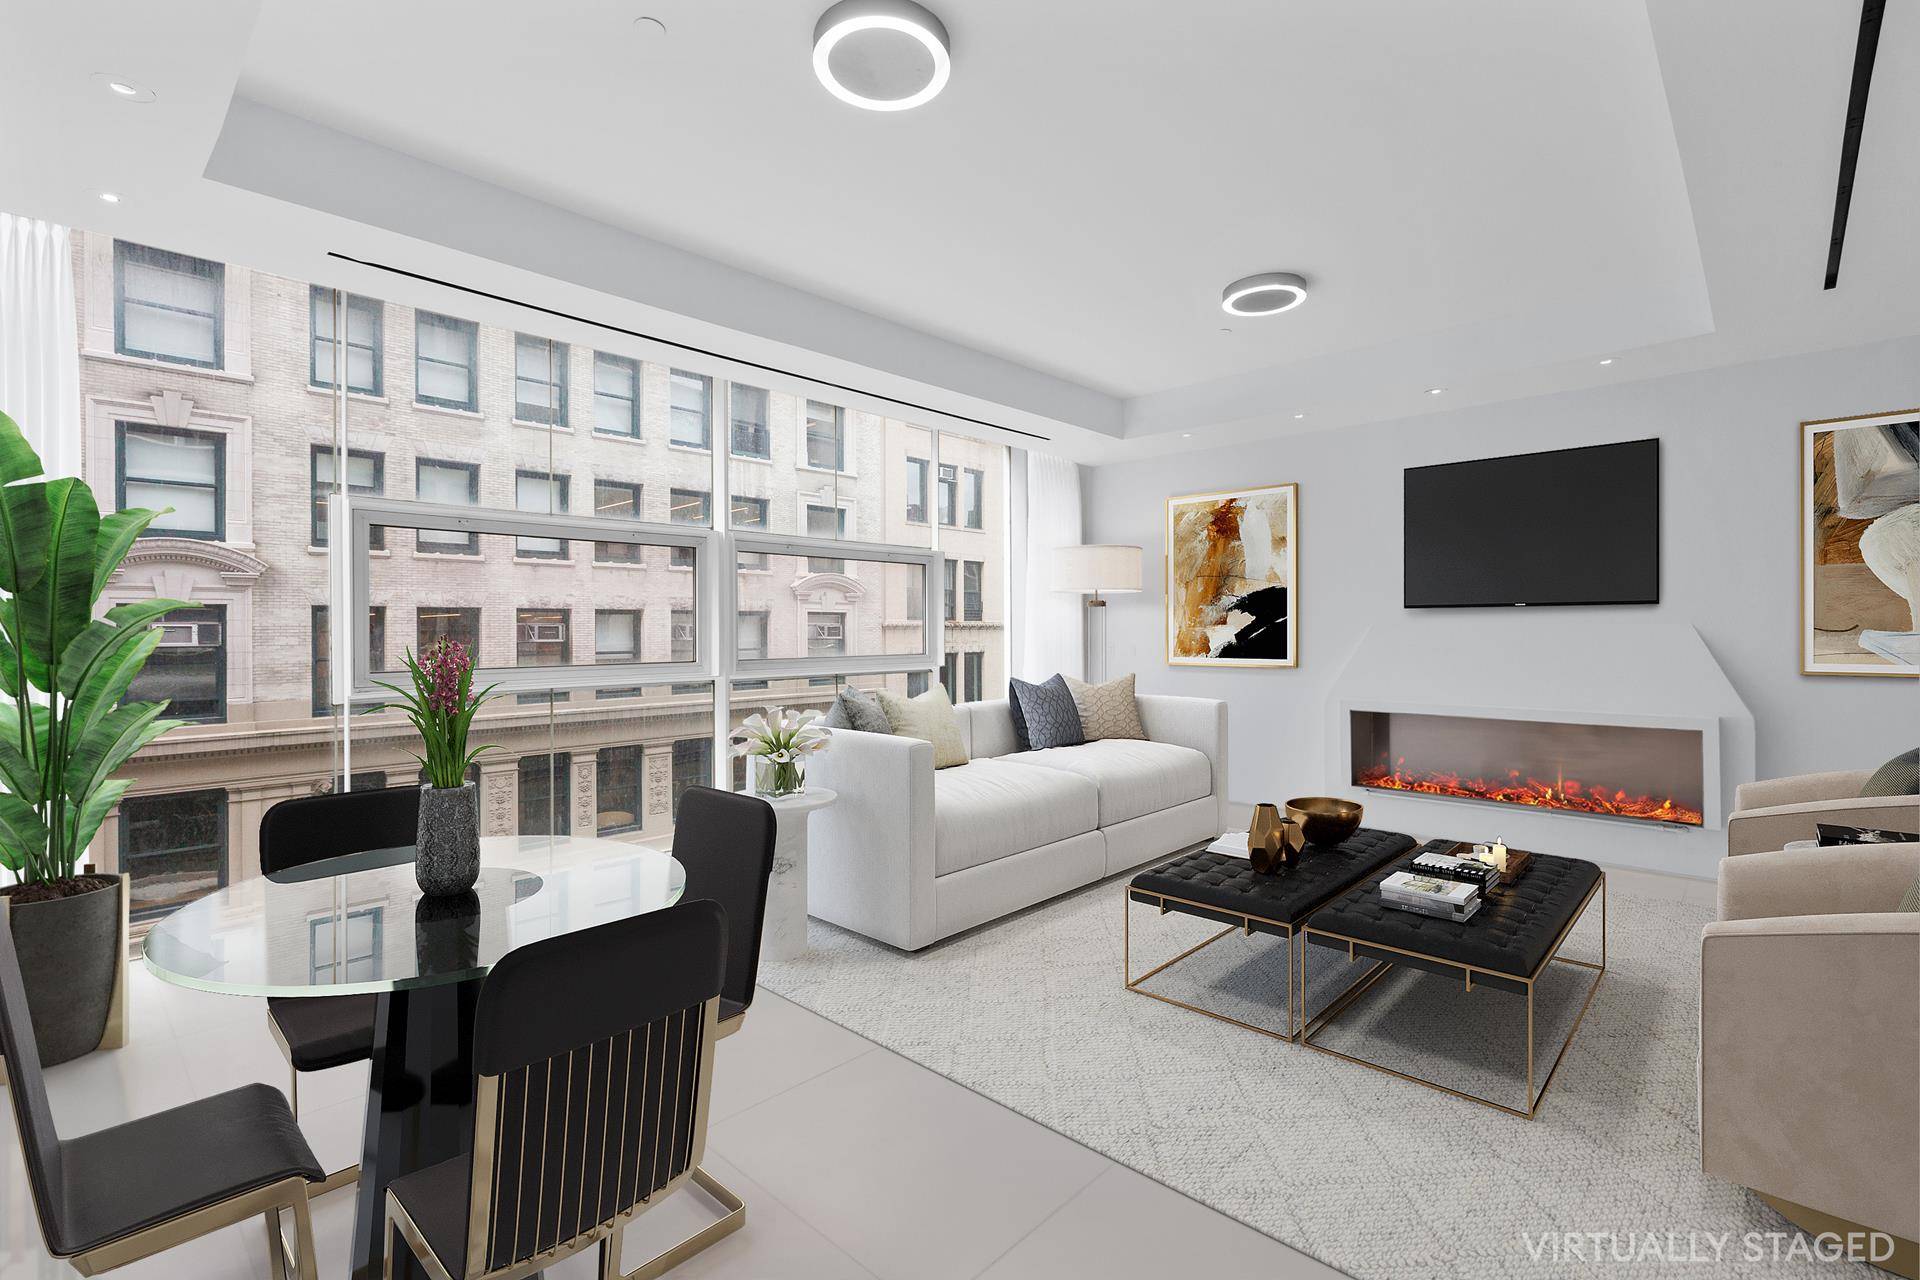 If you love luxury lofts with private outdoor space, in the best location in the heart of Greenwich Village, this 2 bedroom 2 bathroom gem is for you !